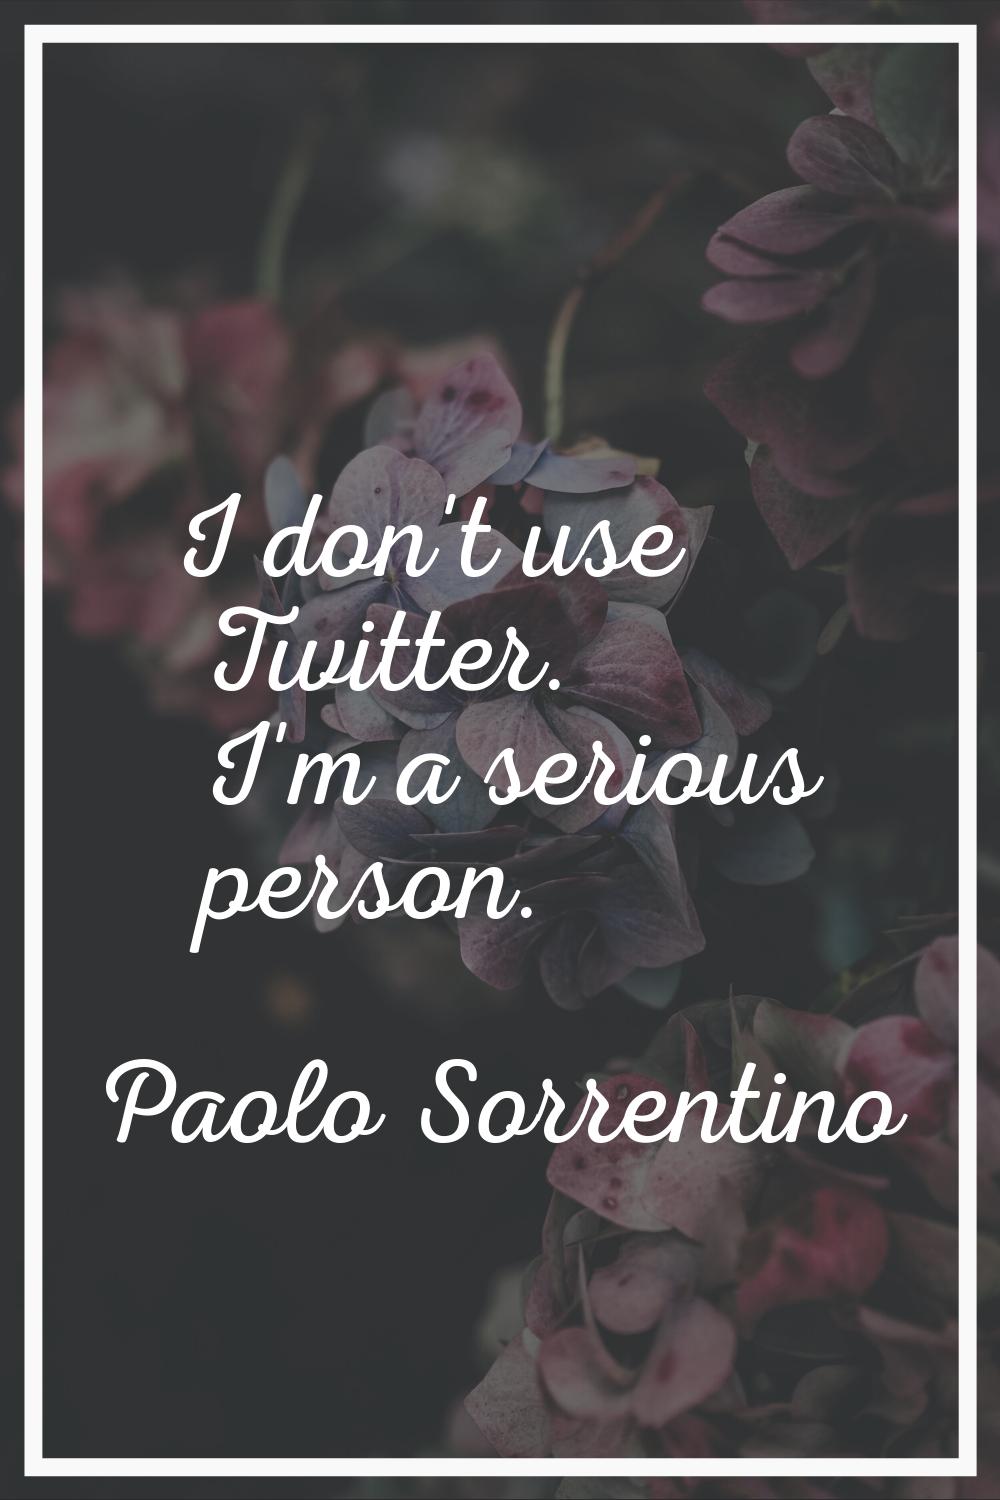 I don't use Twitter. I'm a serious person.